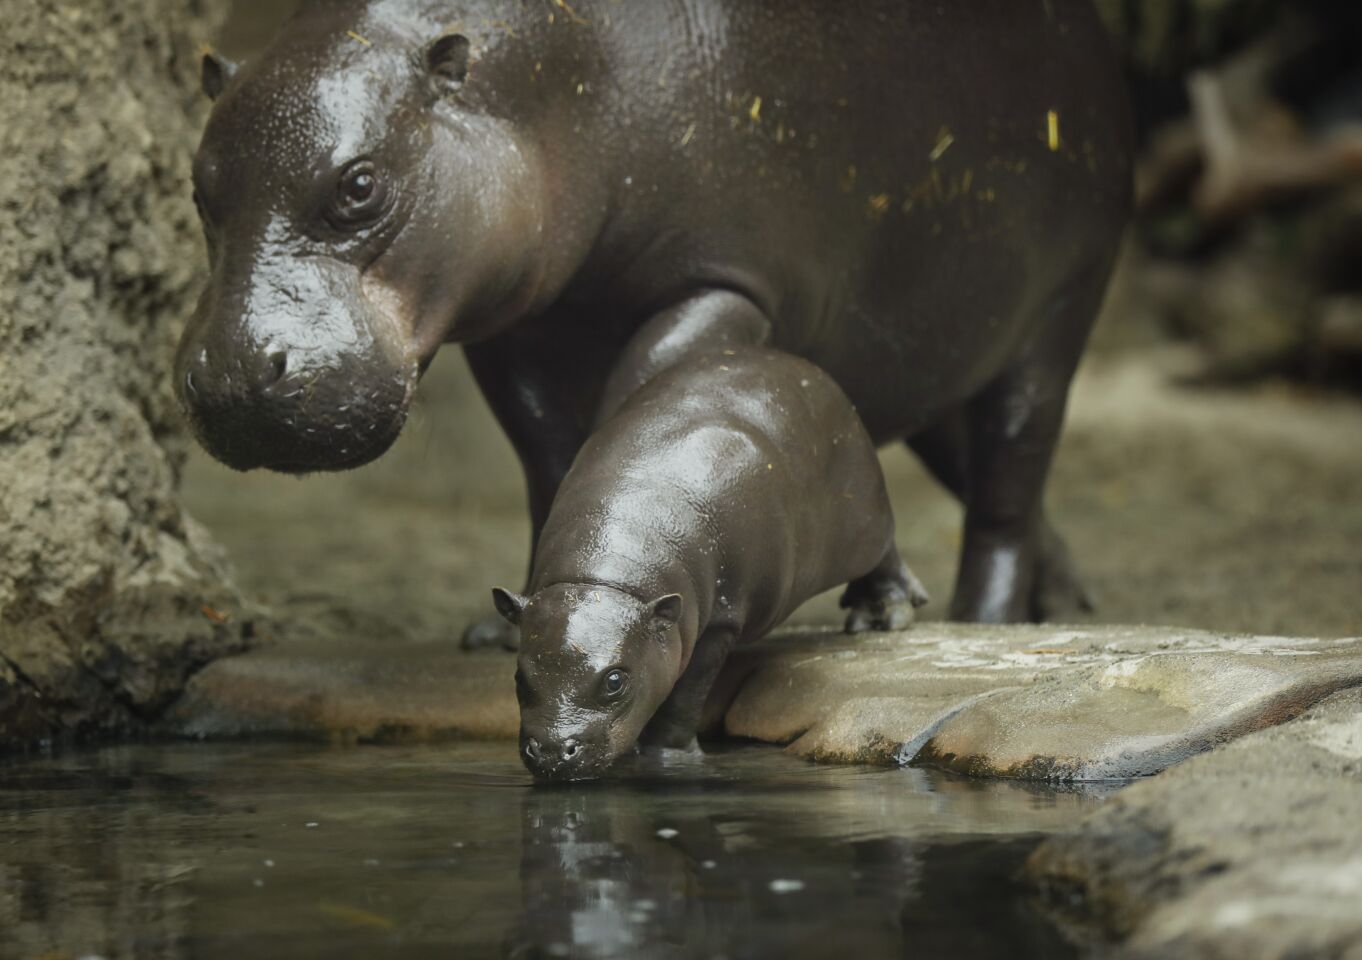 Akobi, a 40-pound, 67-day-old pygmy hippopotamus, walks with his mom Mabel into the water at the San Diego Zoo on June 15, 2020. Akobi was introduced to the public for the first time as it explored the main exhibit for the first time Monday.